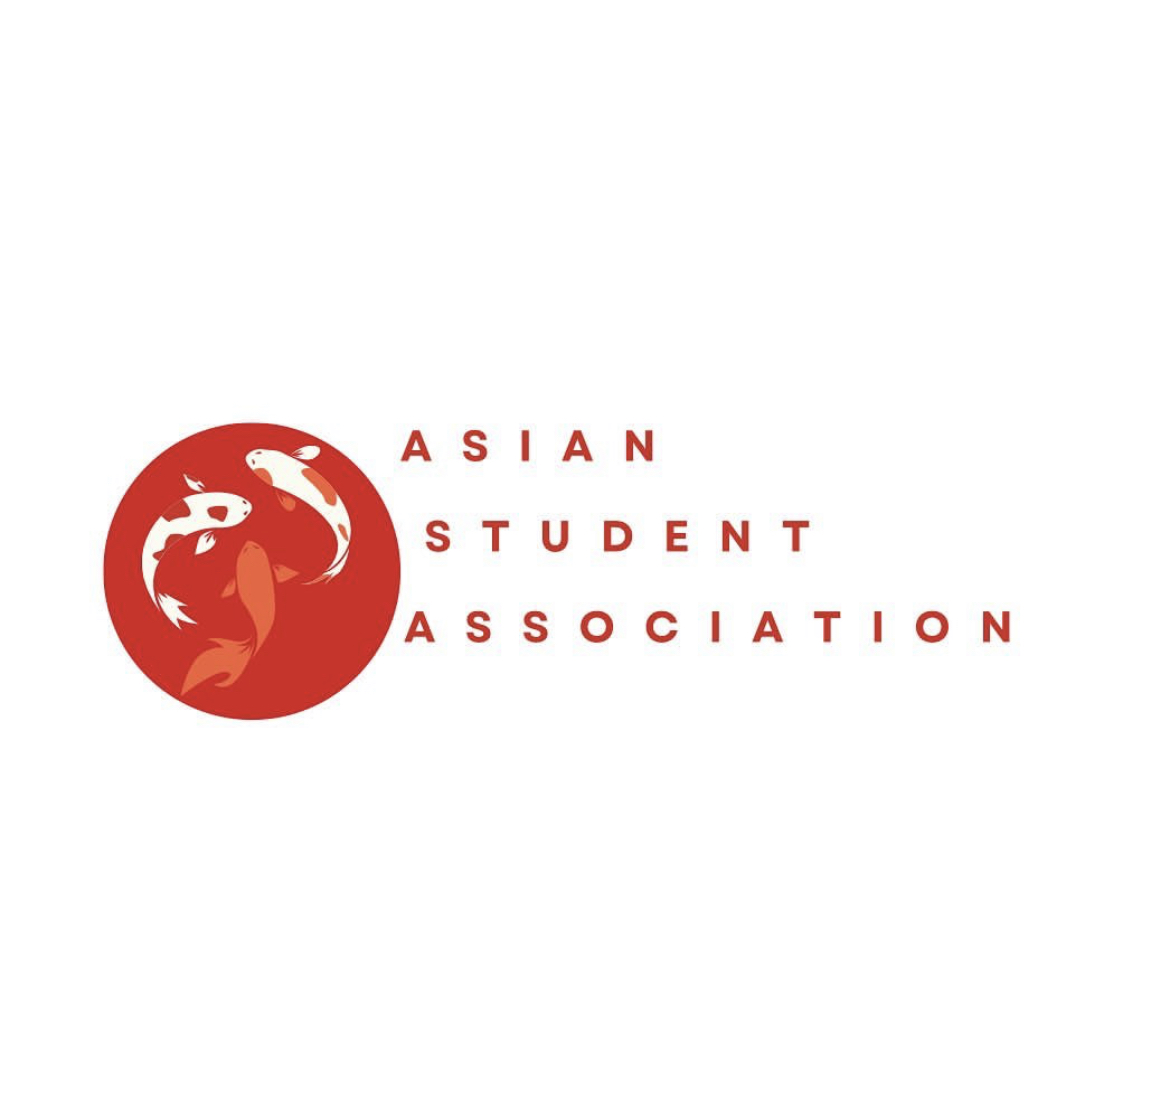 Junior Theo Thompson and senior Kristi Duong created the Asian Student Association this fall. The club has already had a number of meetings and has an upcoming potluck for all HHS students.